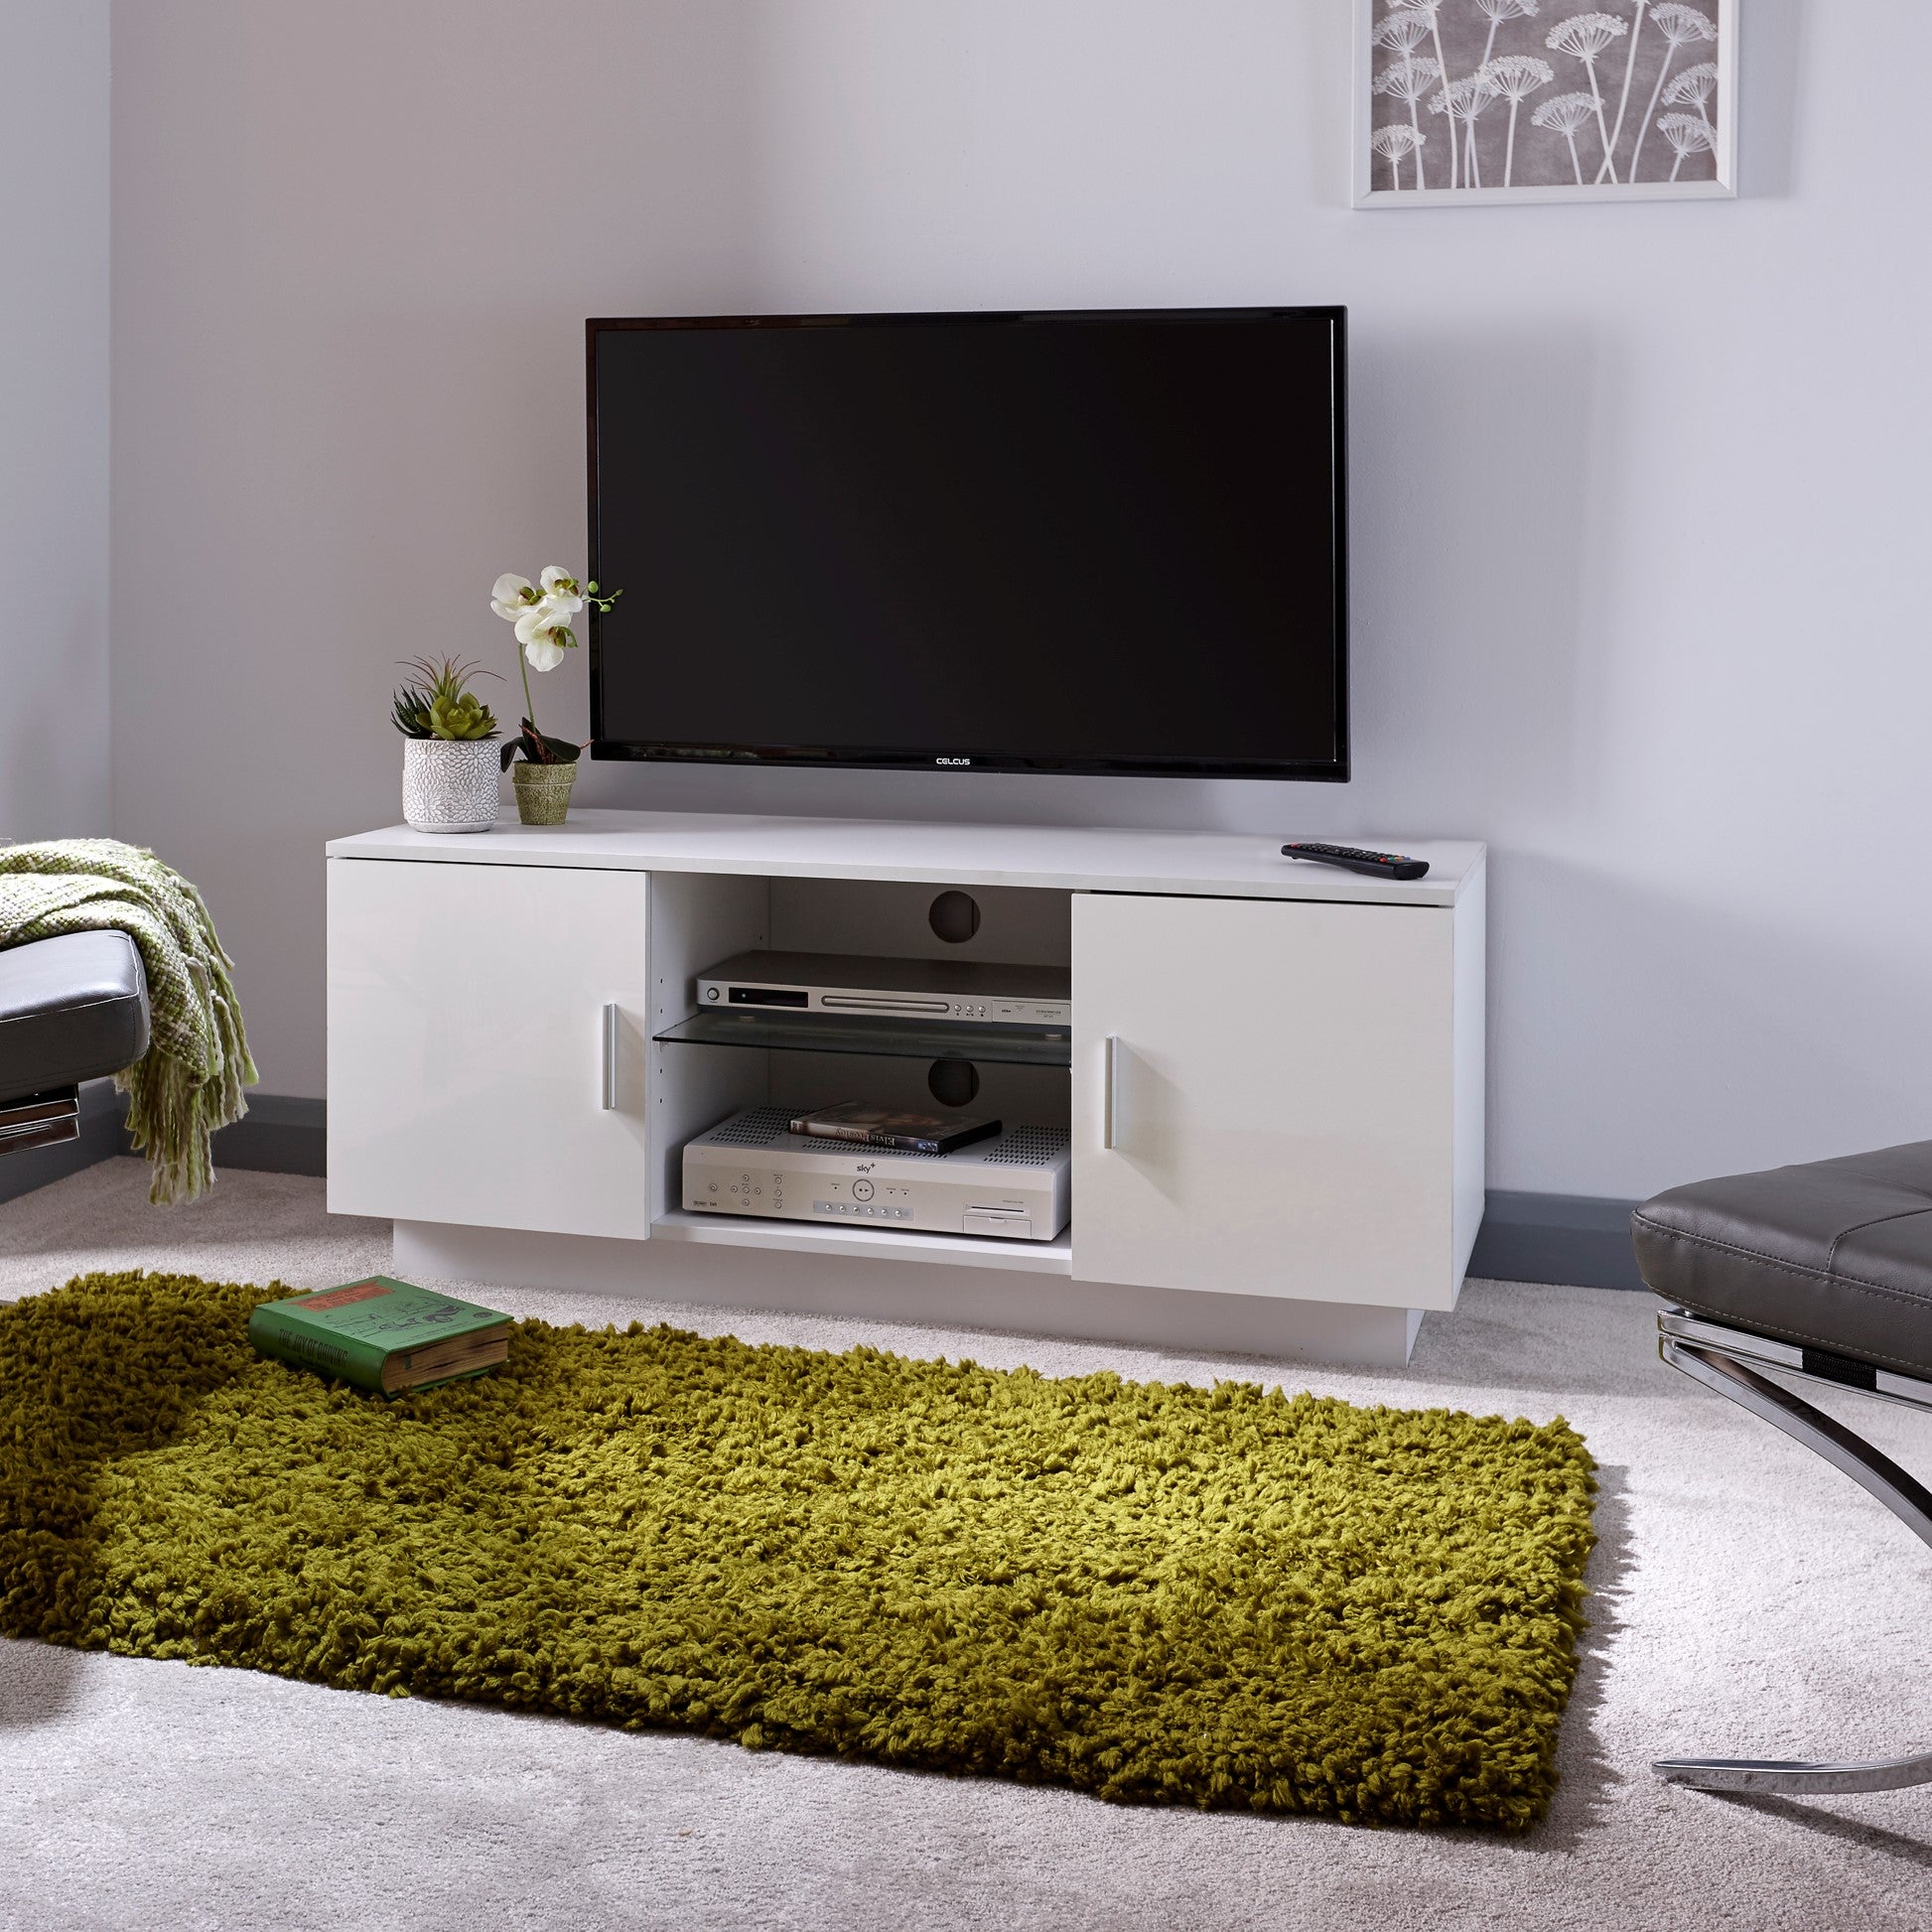 Tv Stands - Tv Units & Cabinets | Dunelm | Page 2